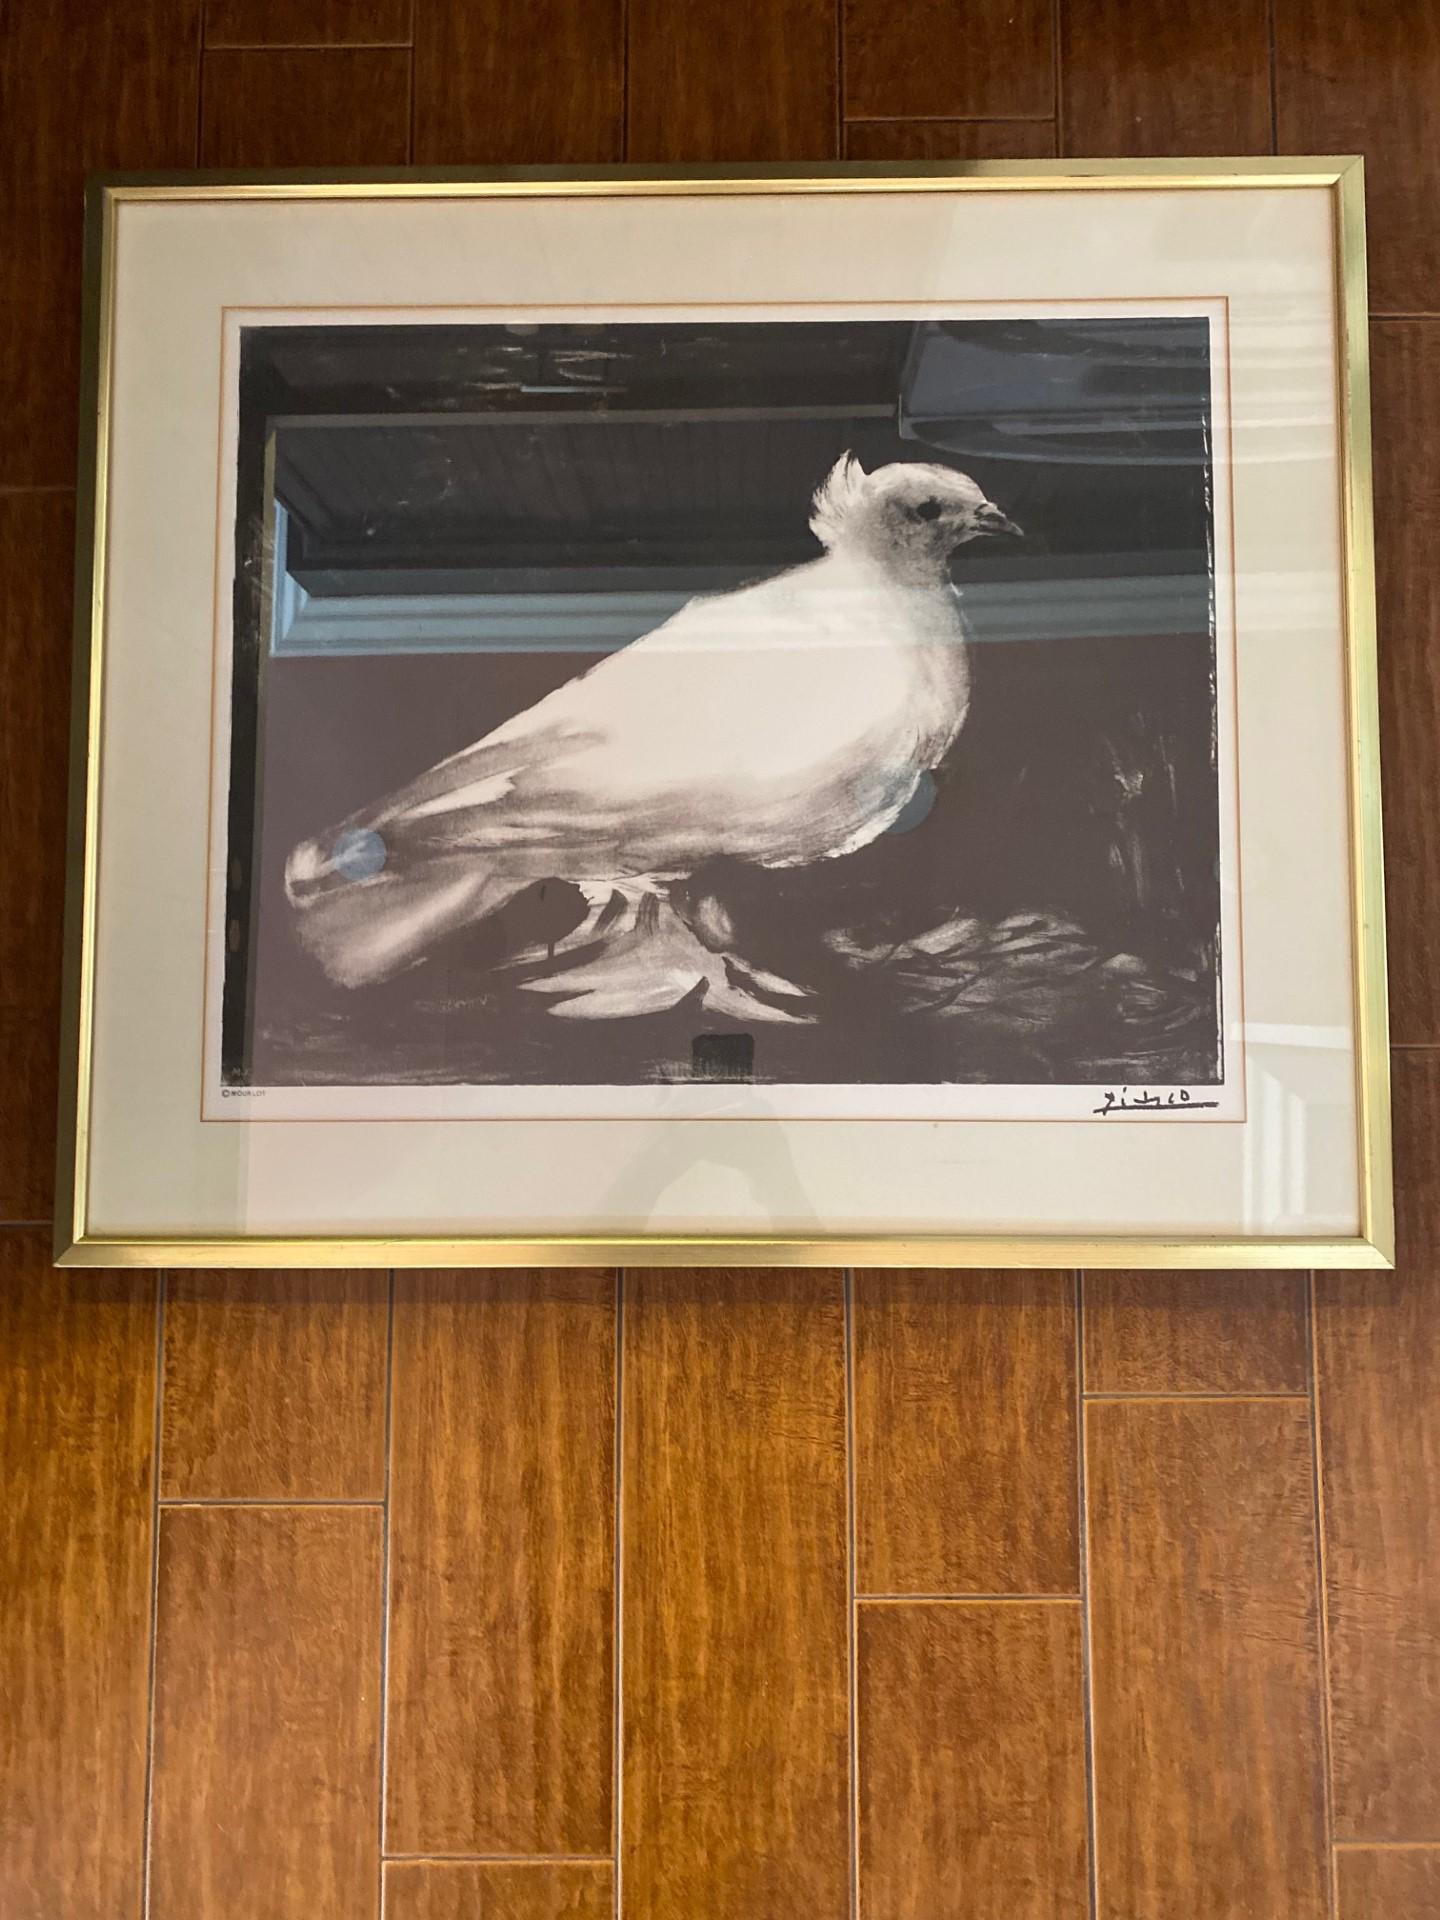 Pressed Vintage Framed Picasso “Dove” or “La Colombe” Lithograph by Mourlot For Sale